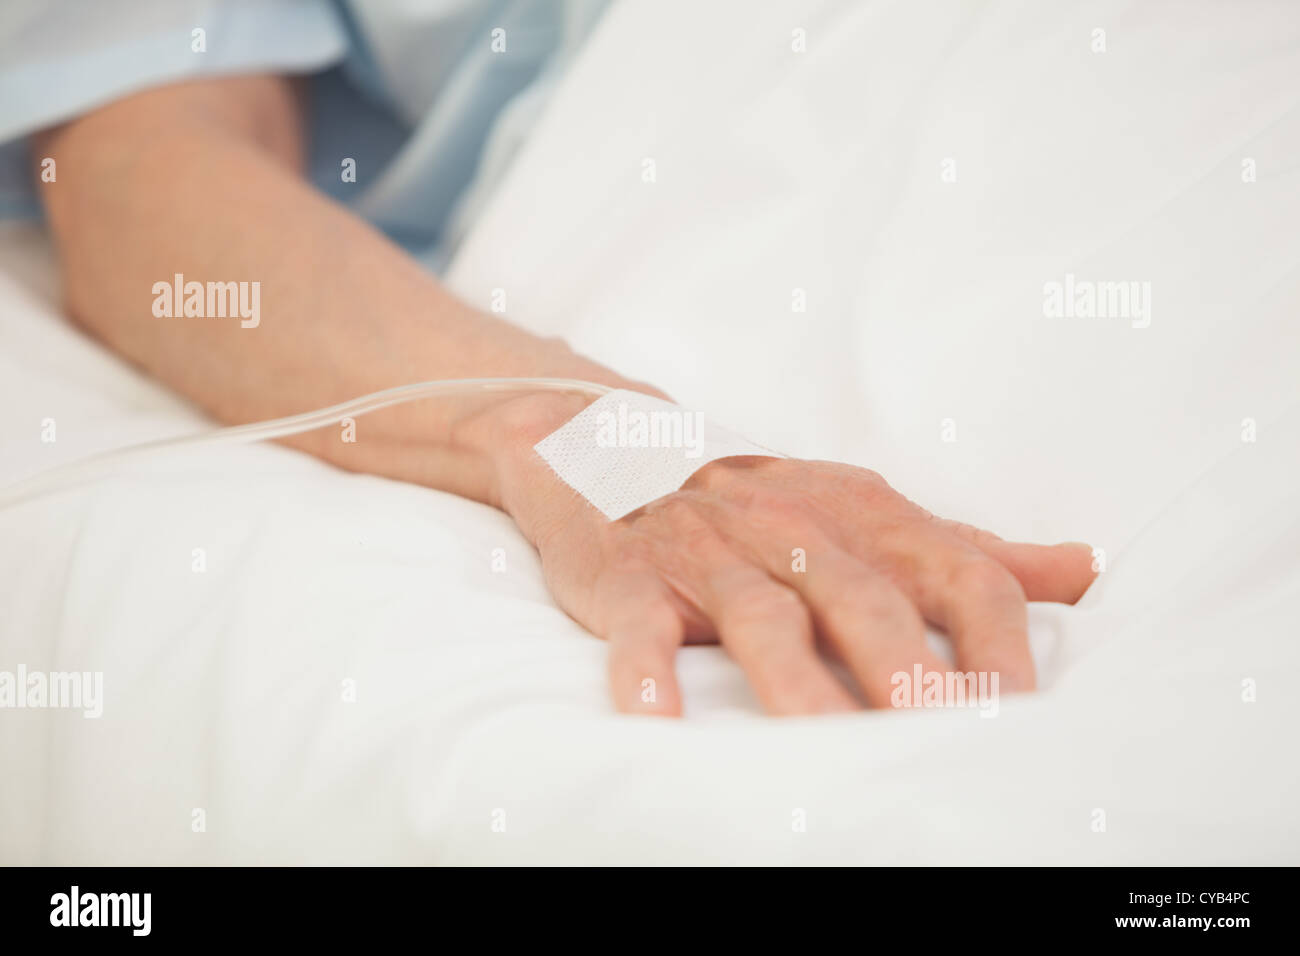 Hand with intravenous drip Stock Photo